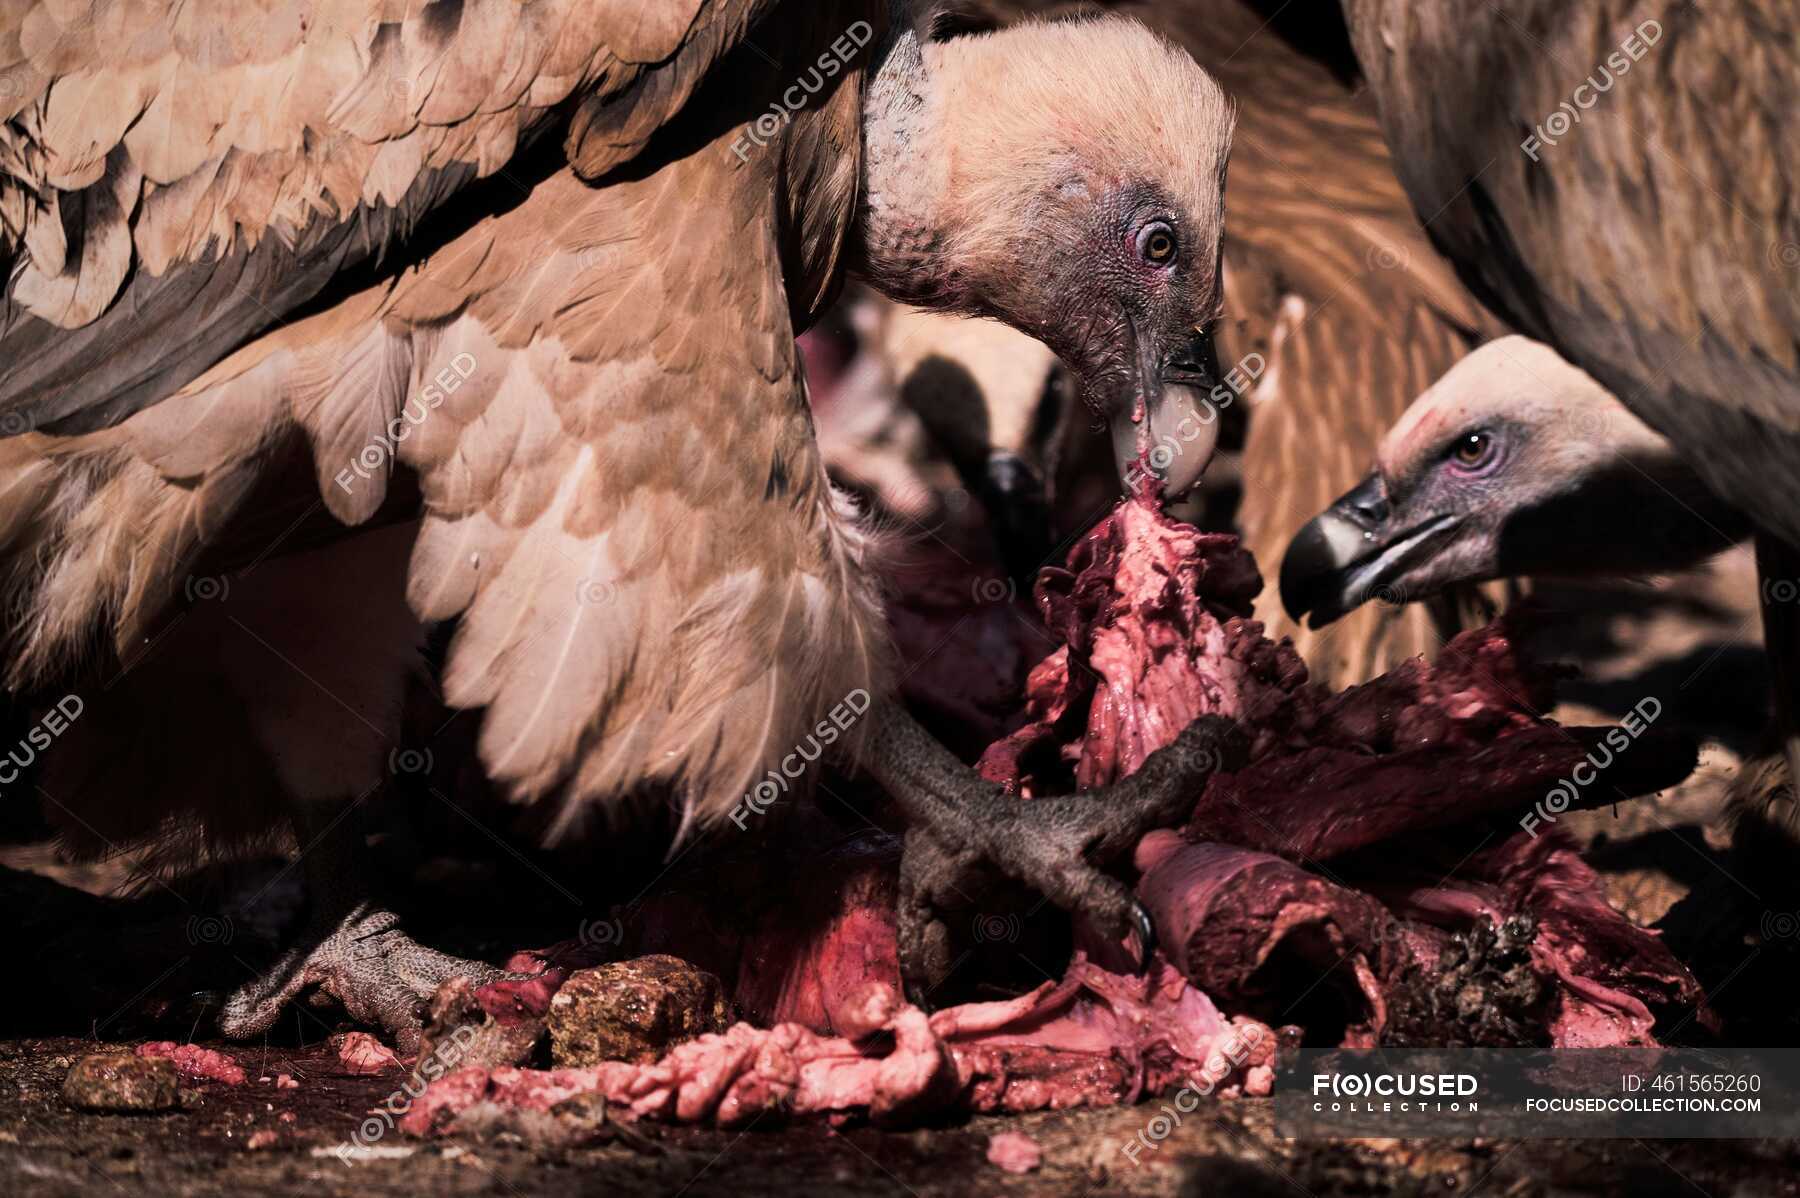 Pair of strong Griffon vultures scavenger birds eating flesh of dead animal  in wild nature — head, fauna - Stock Photo | #461565260